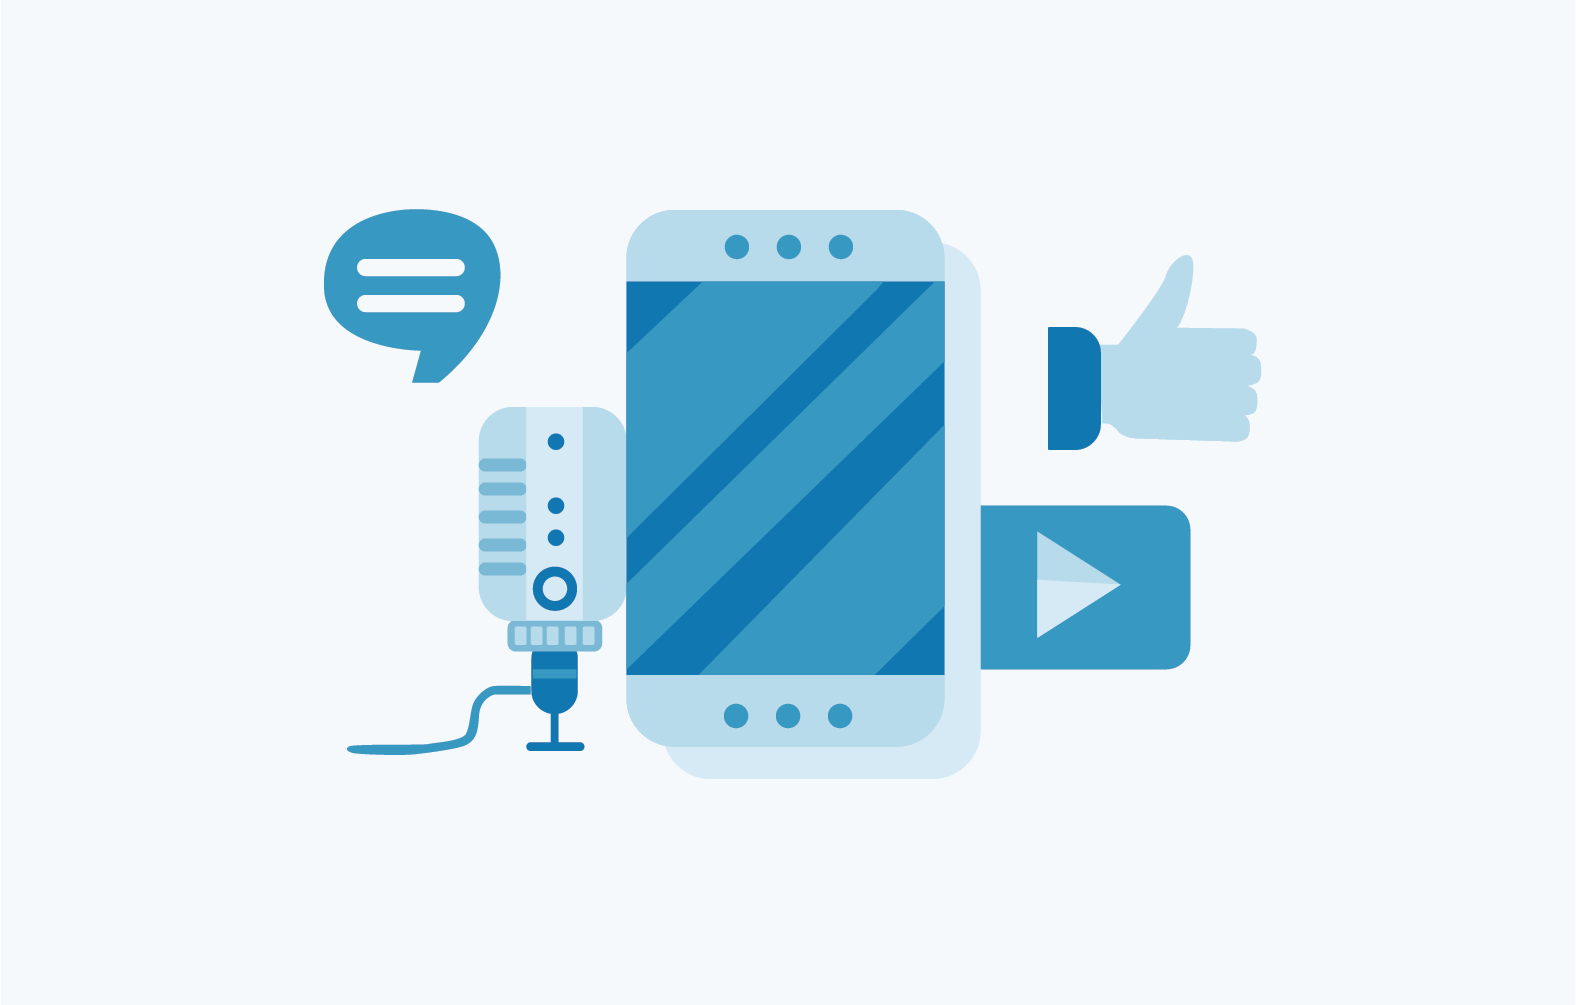 Illustration of a speech bubble, microphone, mobile phone, thumbs up and video play button